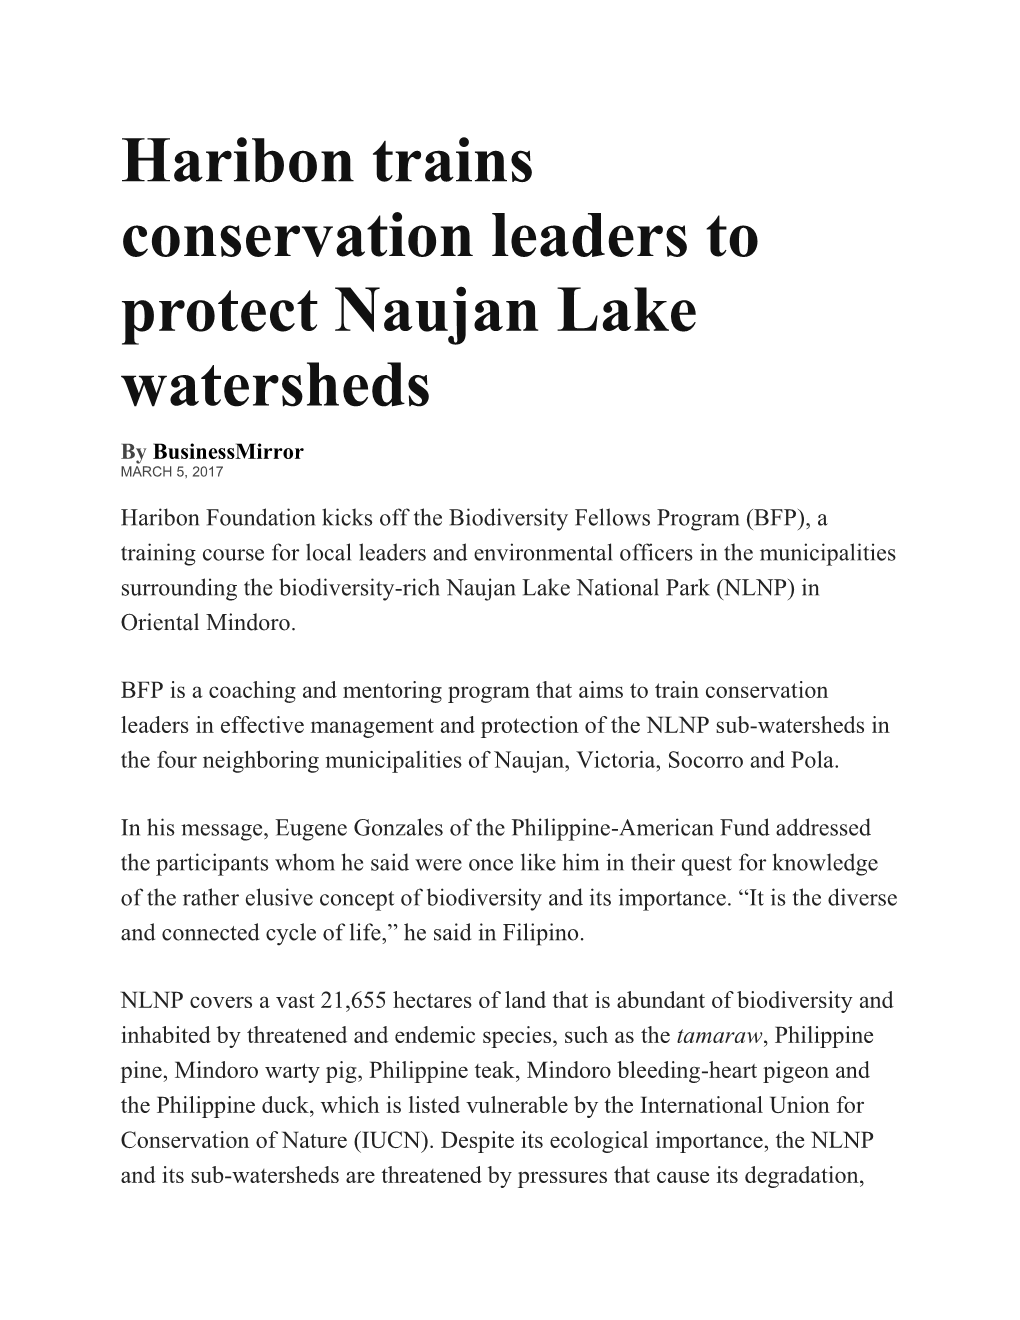 Haribon Trains Conservation Leaders to Protect Naujan Lake Watersheds by Businessmirror MARCH 5, 2017